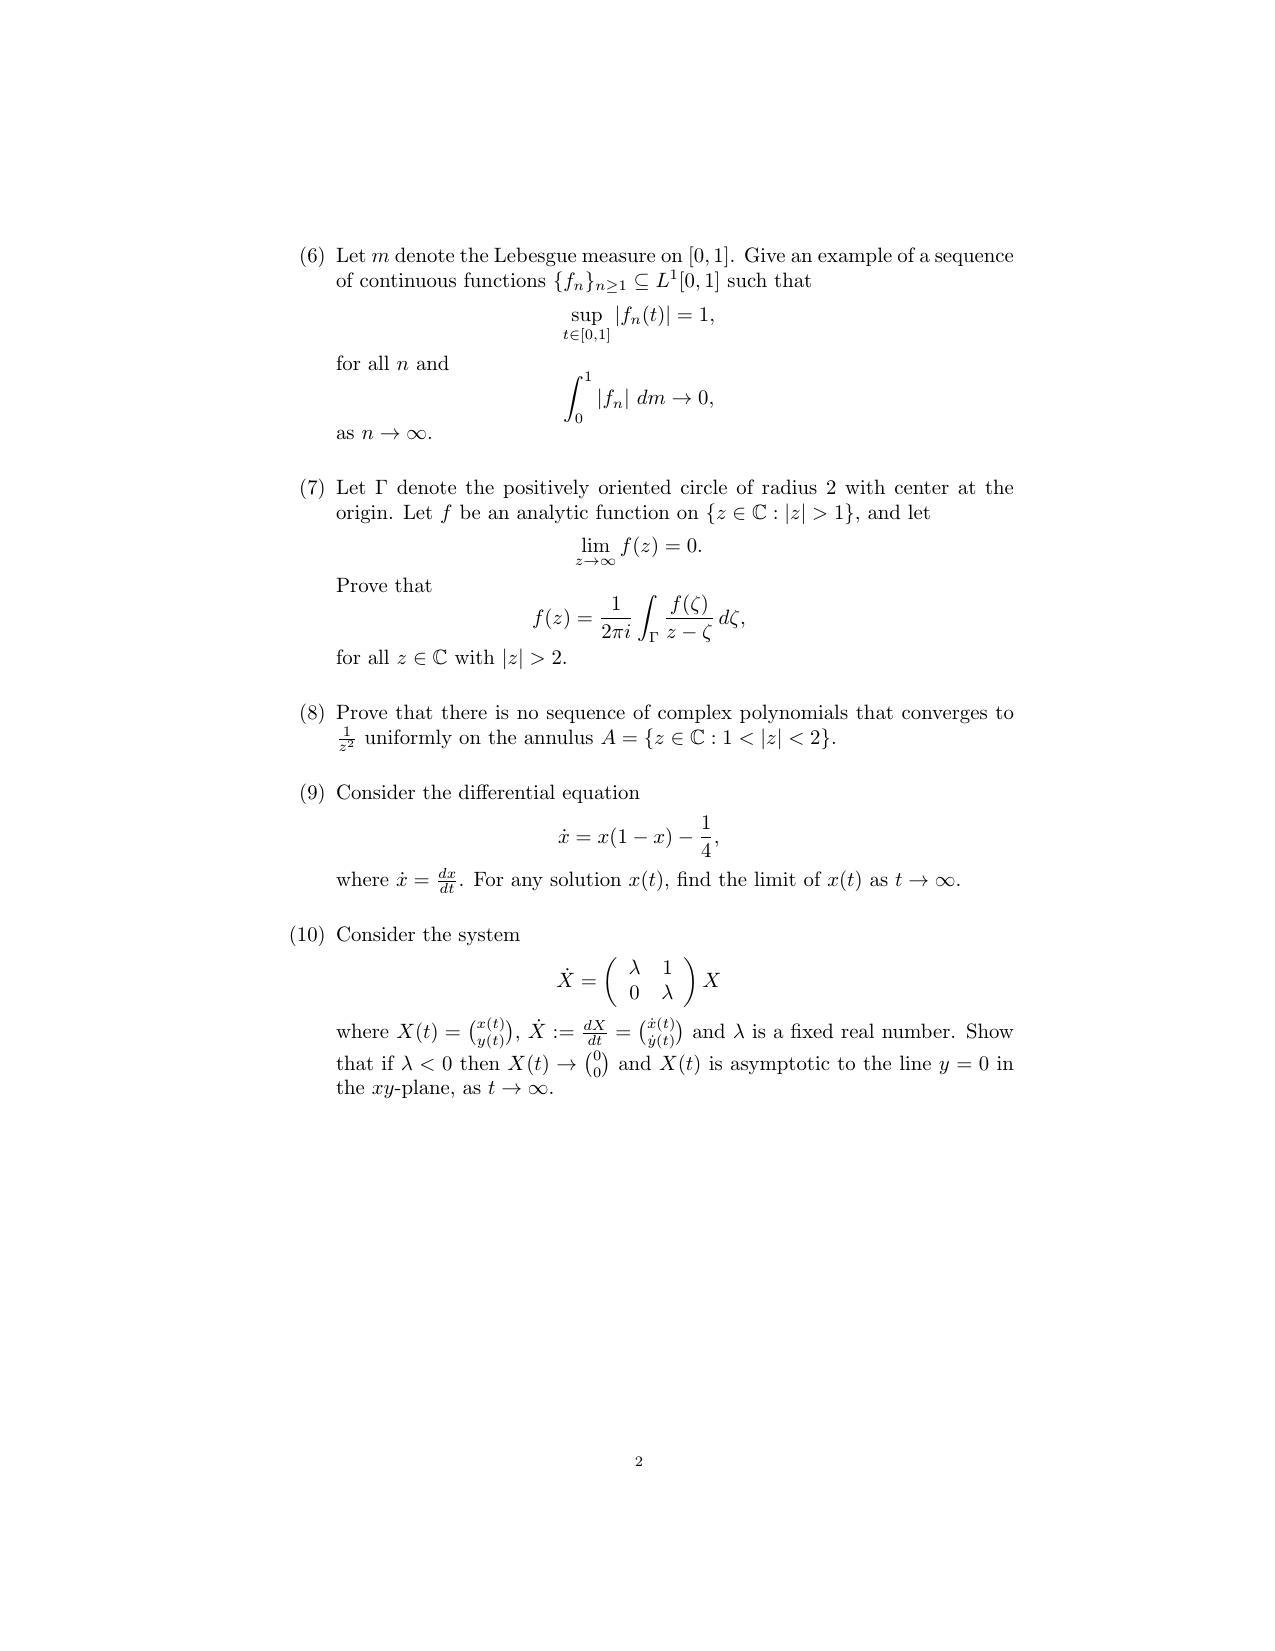 ISI Admission Test JRF in Mathematics MTA 2018 Sample Paper - Page 2